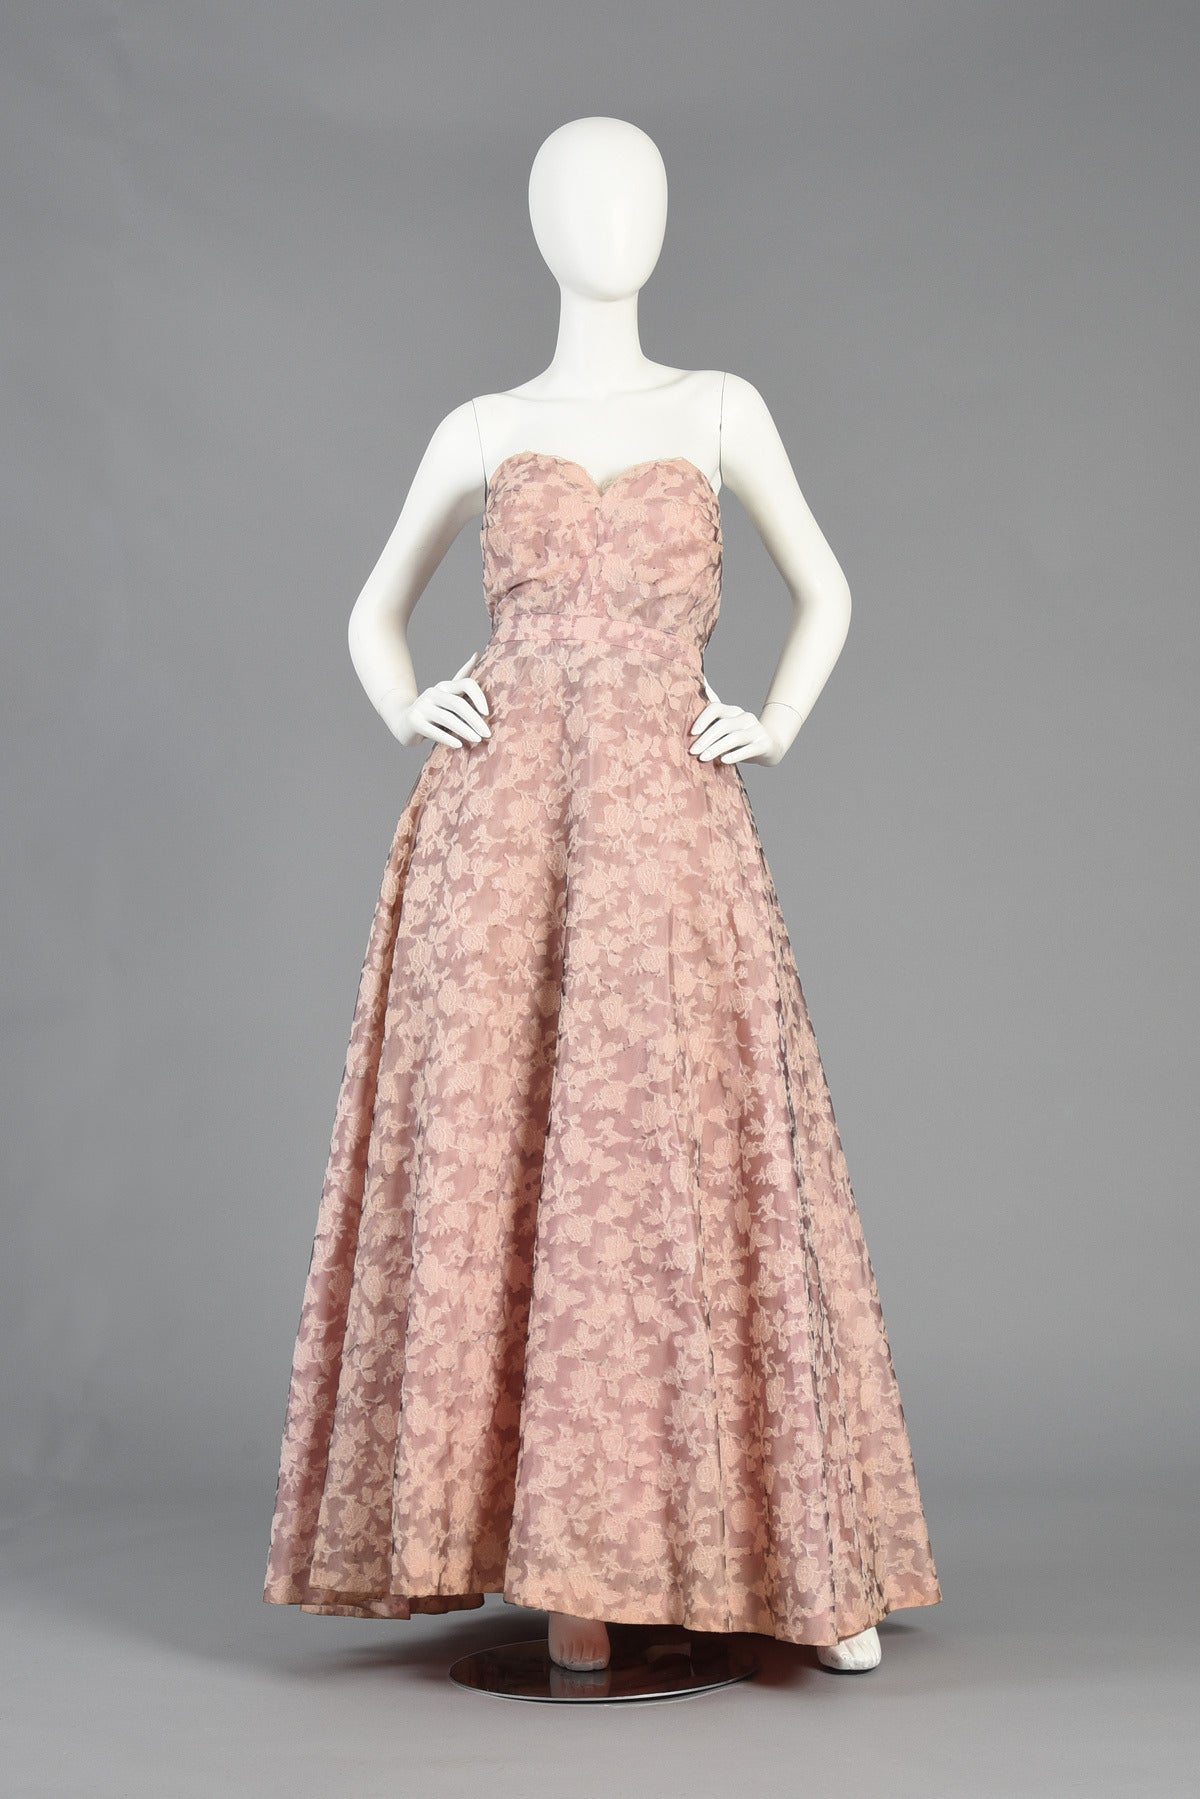 Bustown Modern is so proud to present this stunning 1950's Nettie Rosenstein lace evening gown. A spectacular find in excellent vintage condition. Pale pink silk taffeta body with black and white floral lace overlay. Strapless sweetheart neckline